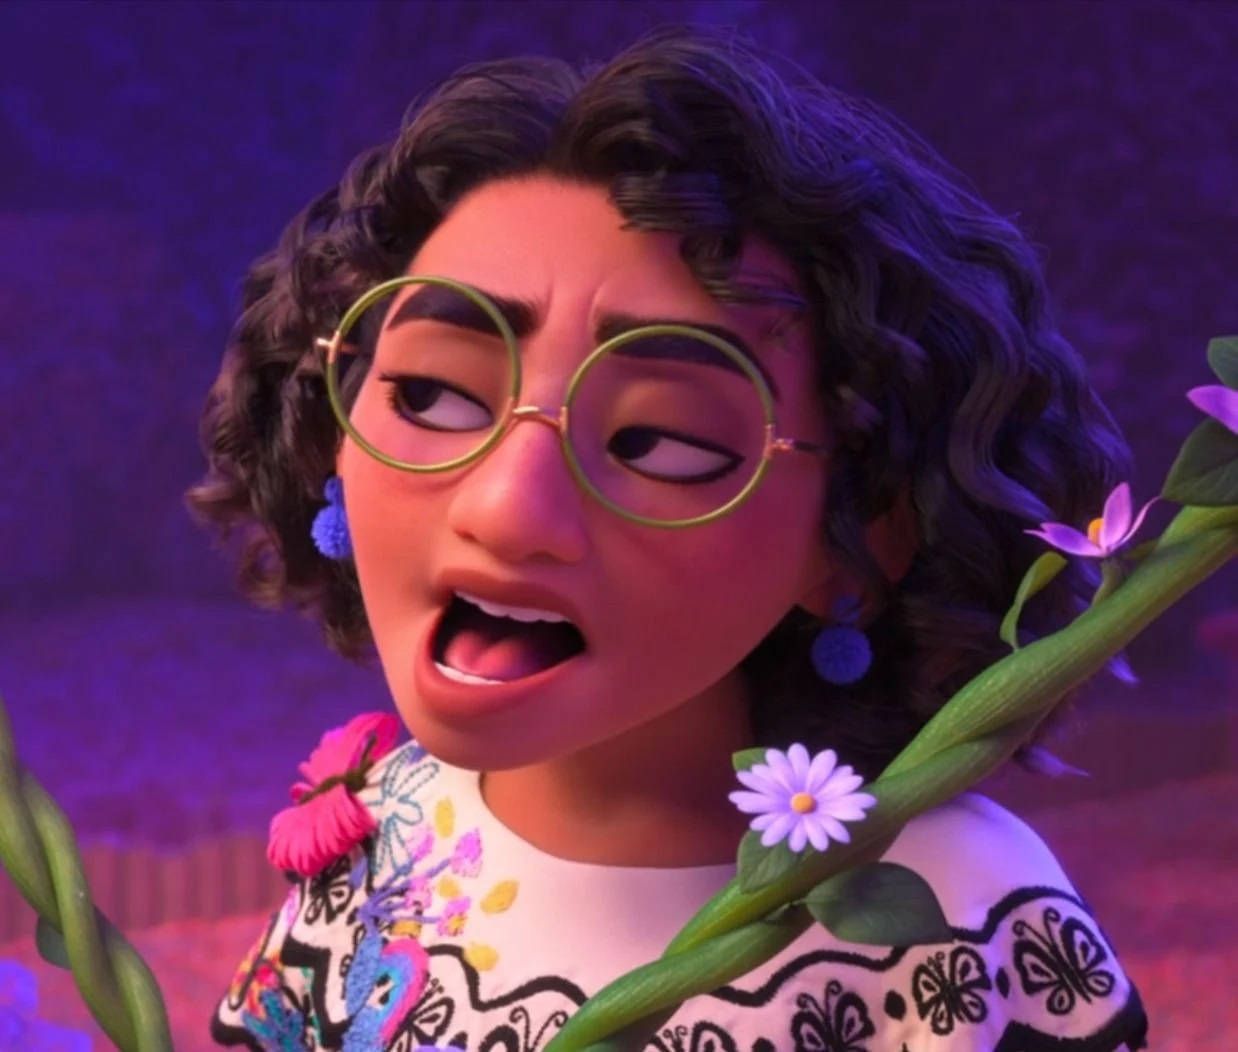 A still from Pixar's 'Coco' showing a character with curly hair and glasses holding flowers. - Encanto